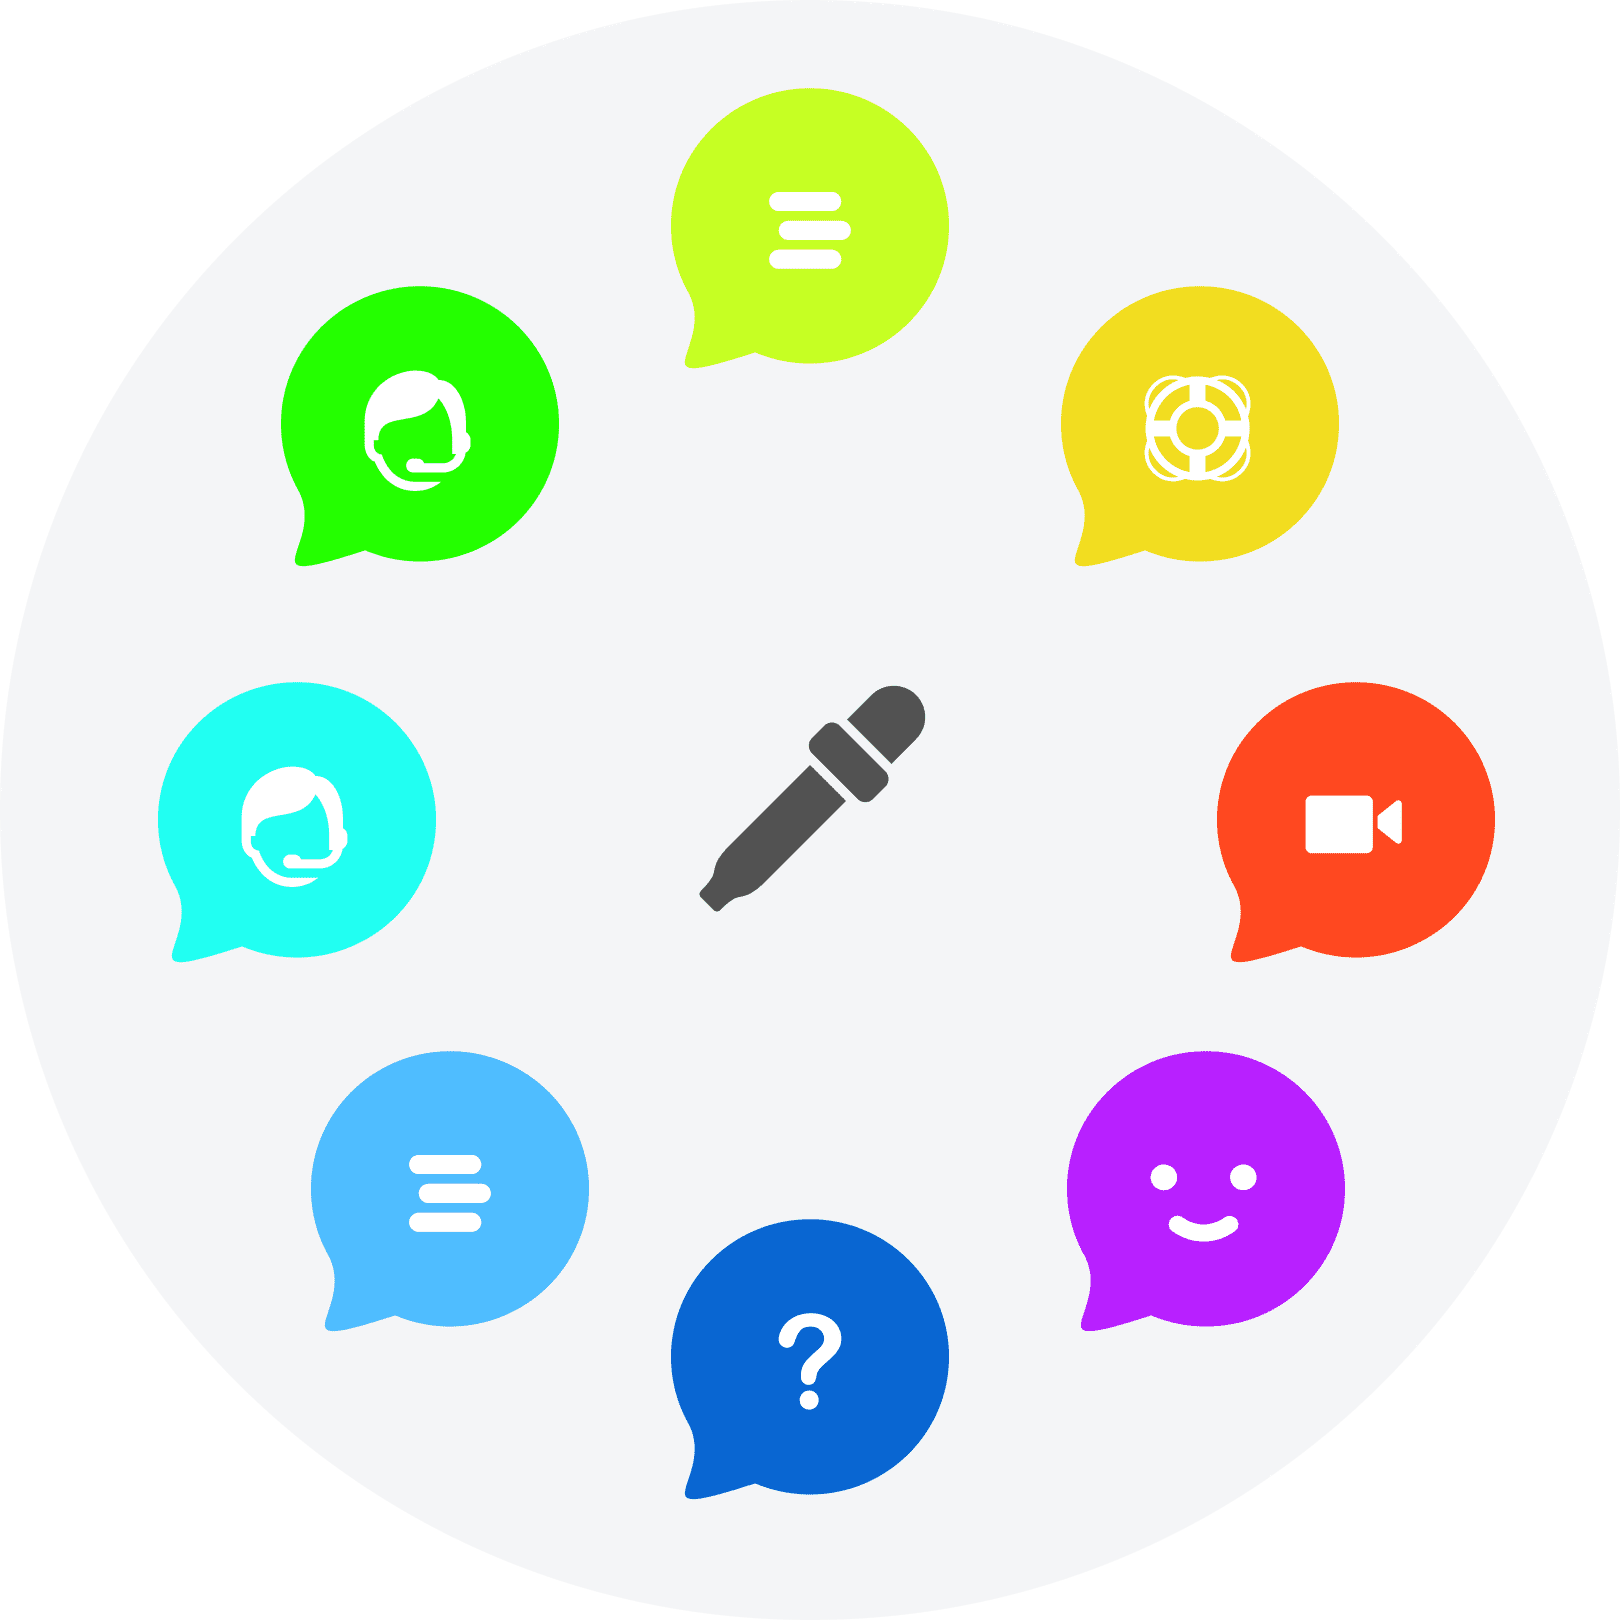 Let’s customize your Live Chat behavior and appearance